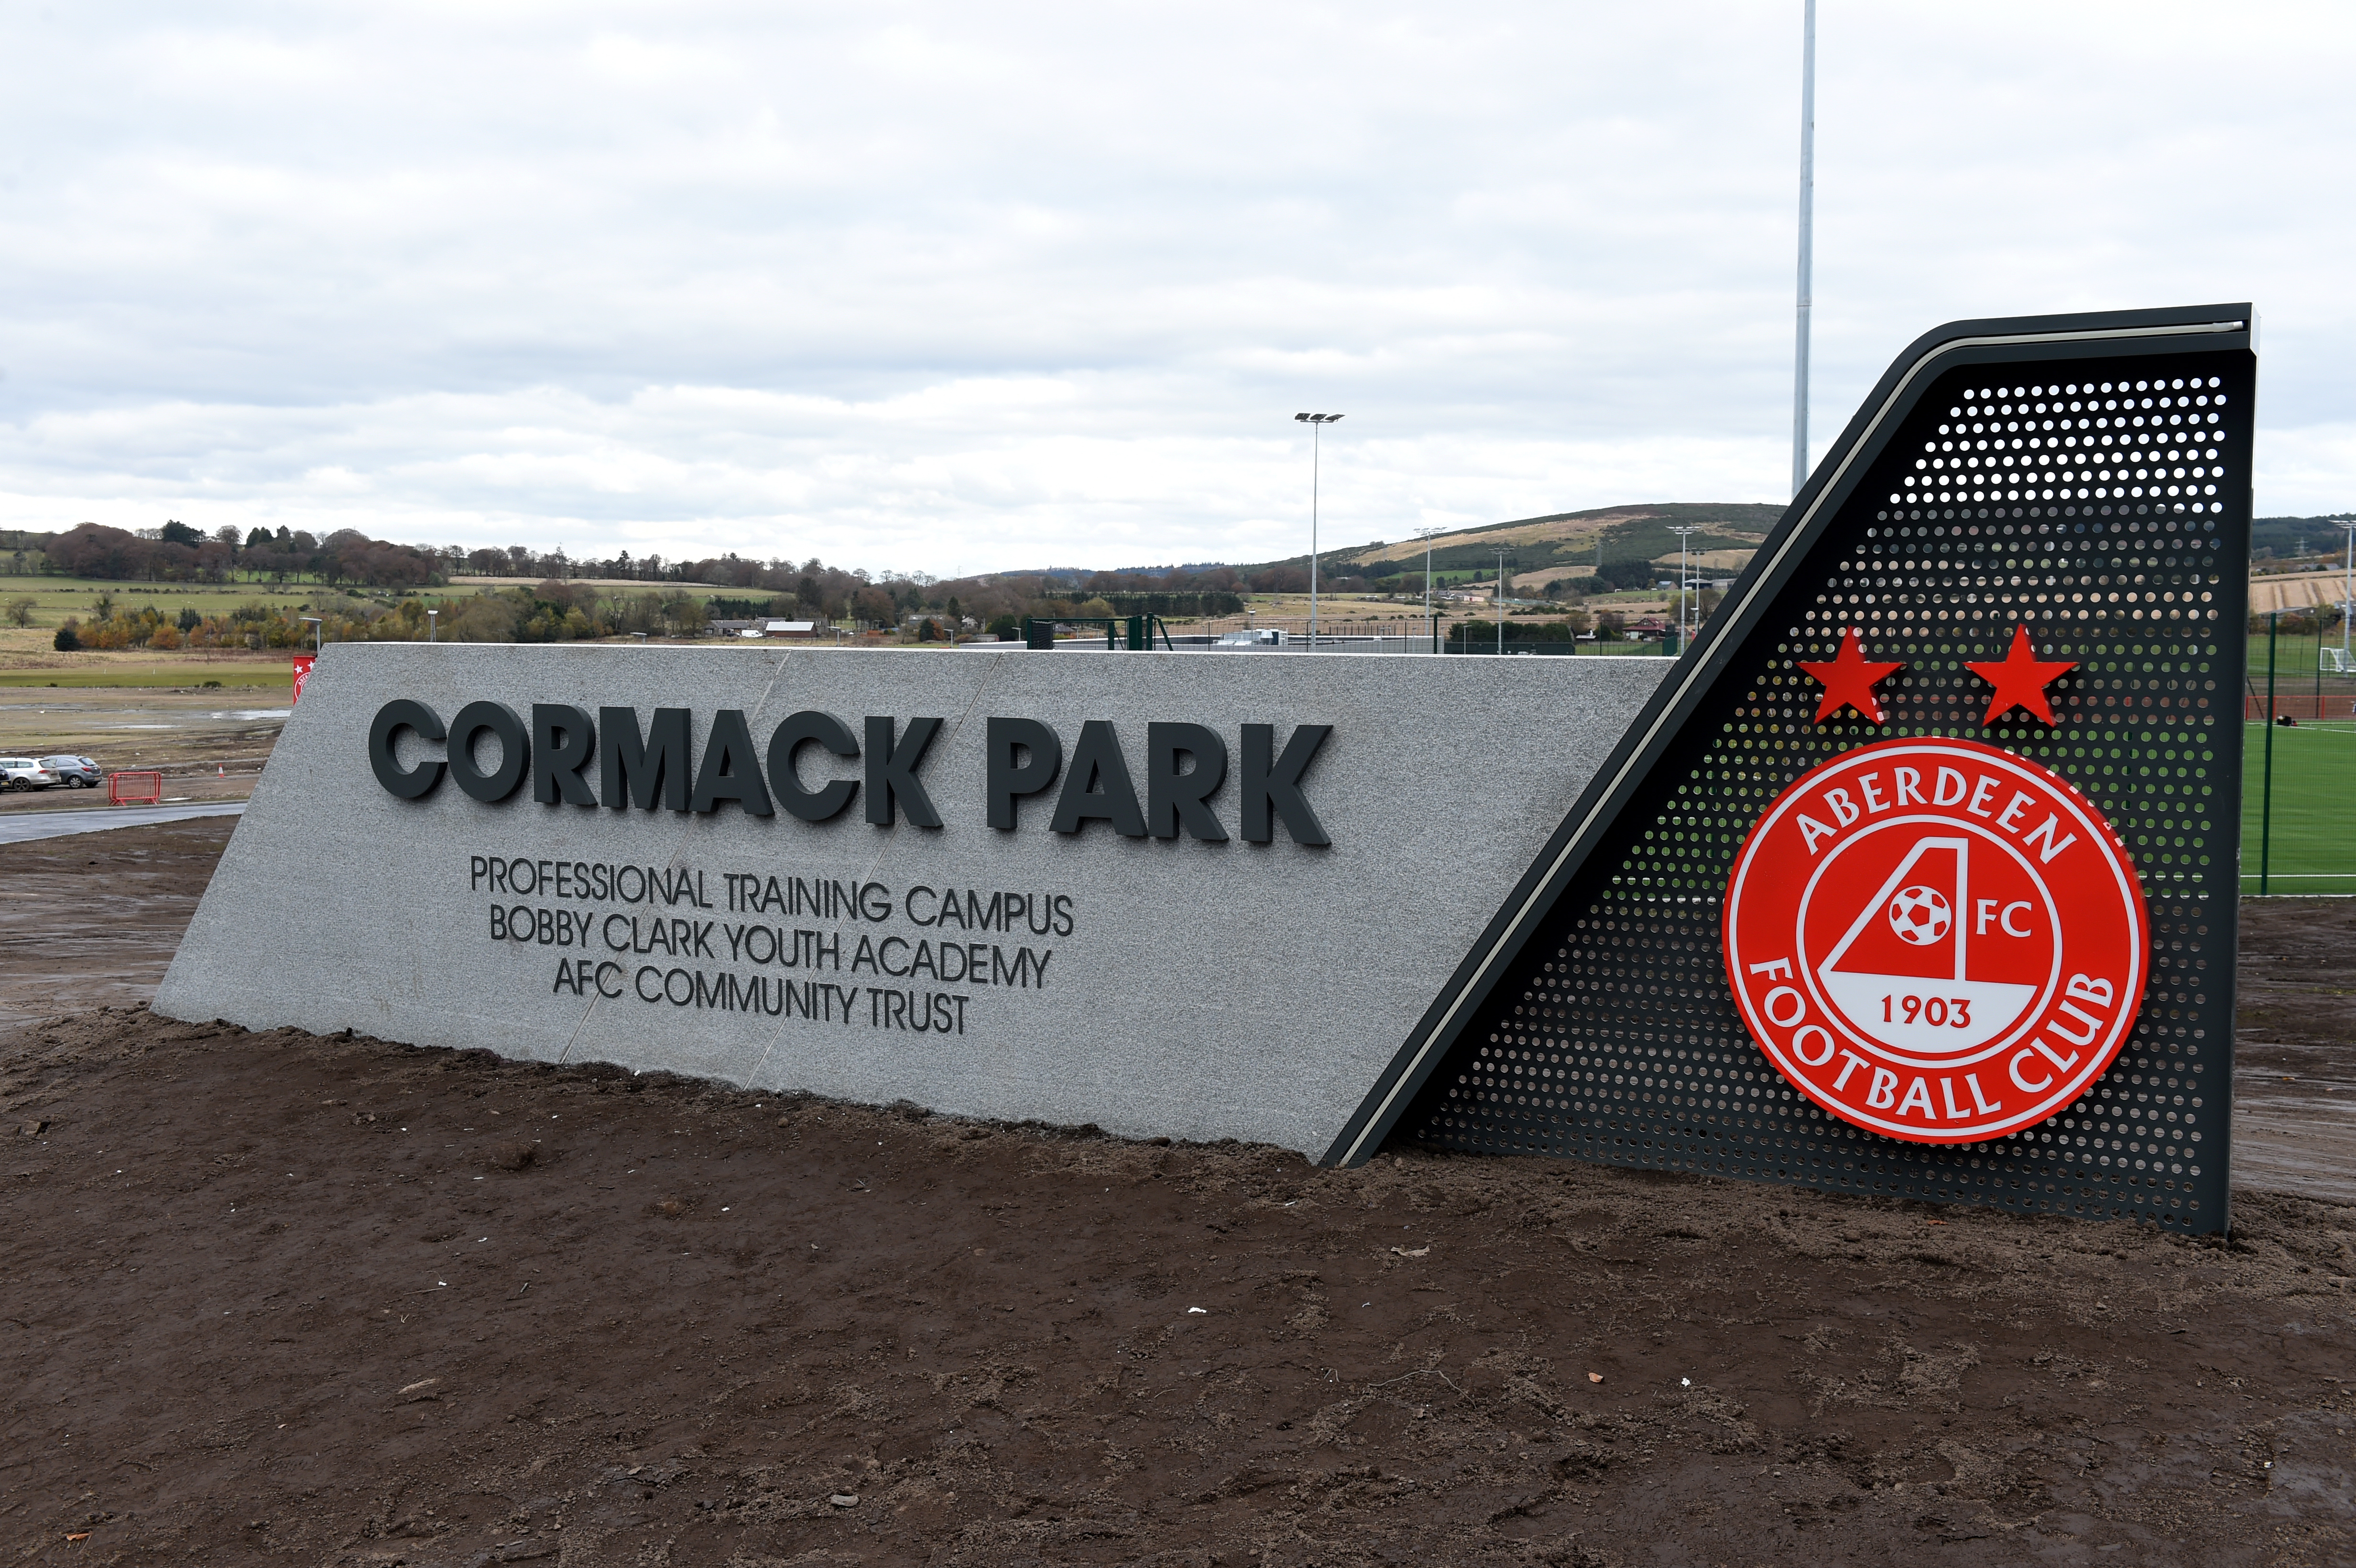 Cormack Park.
Picture by Kenny Elrick